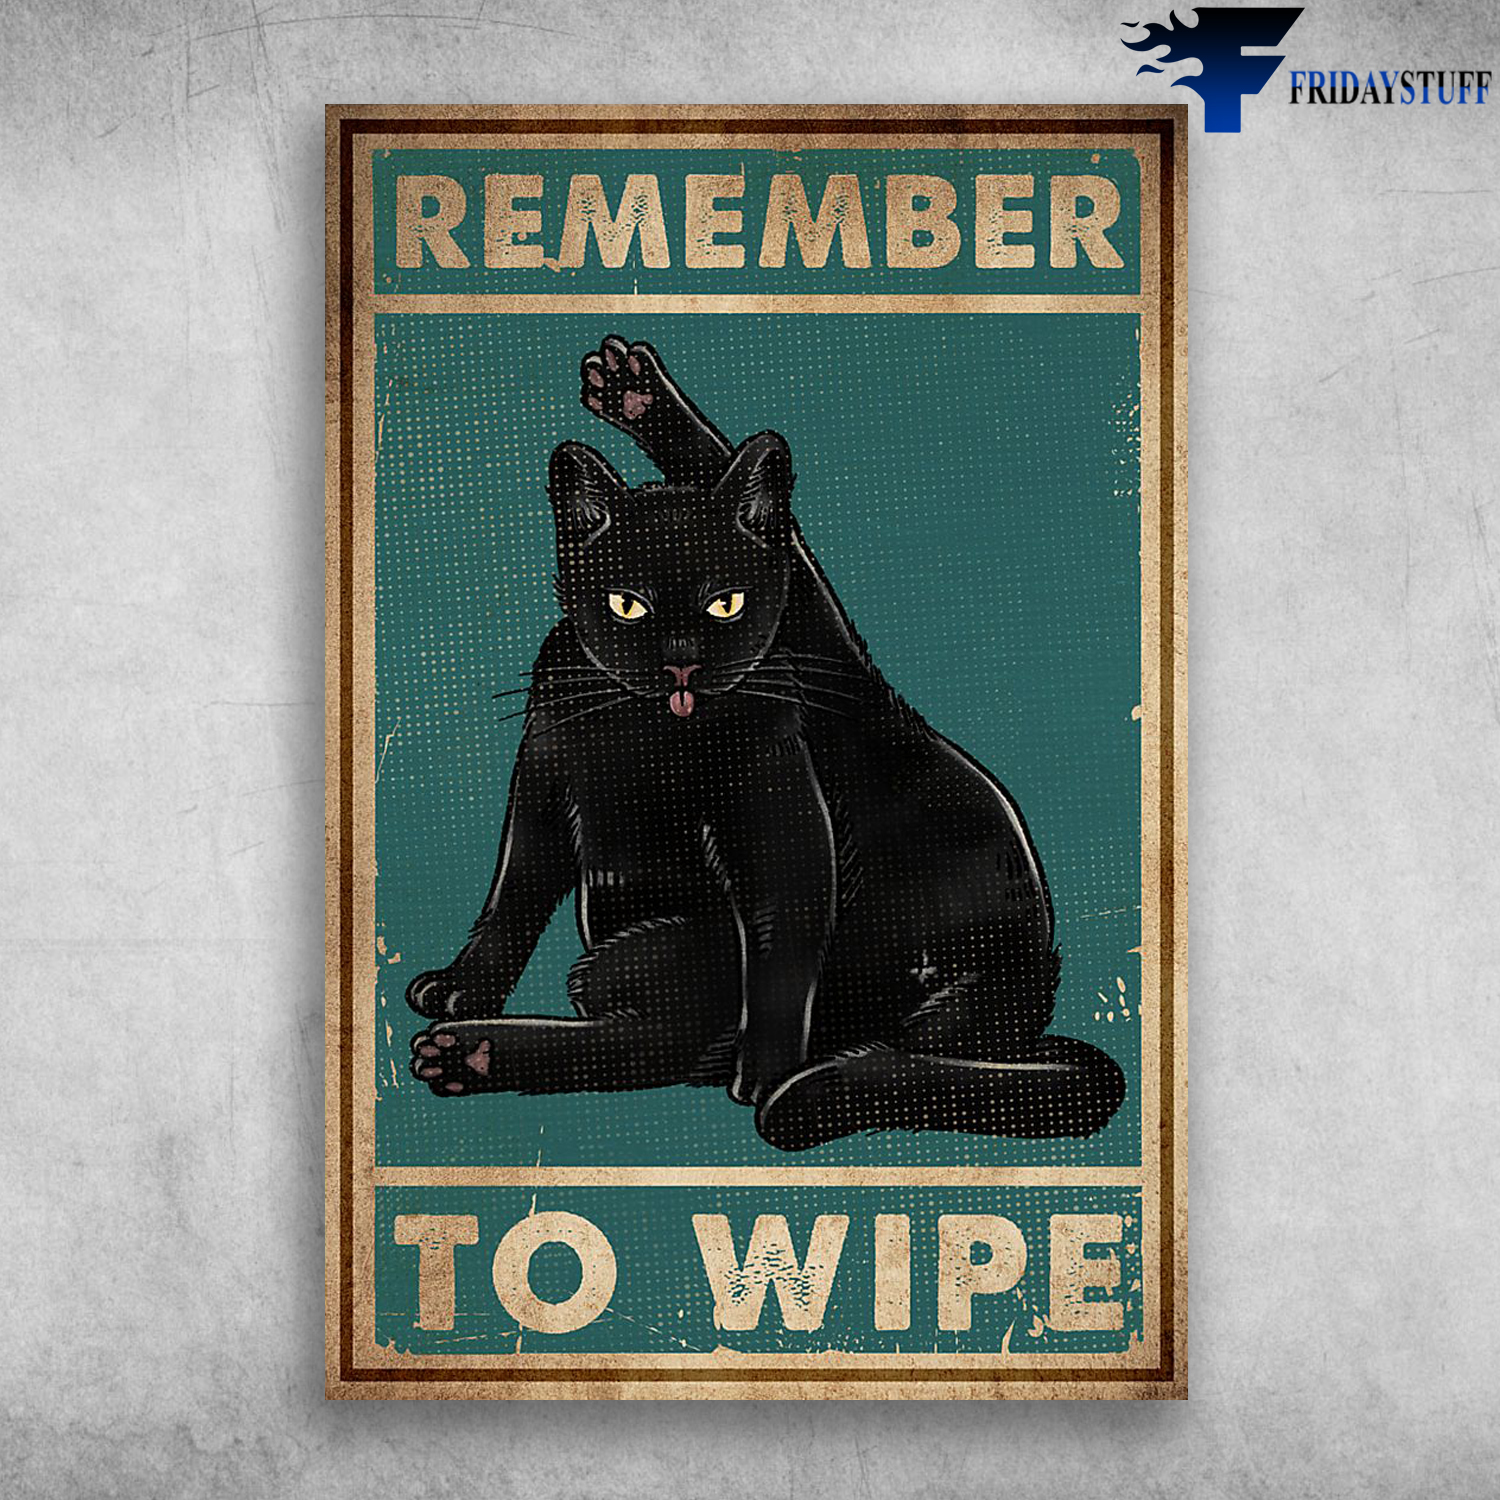 Remember To Wife - Black Cat